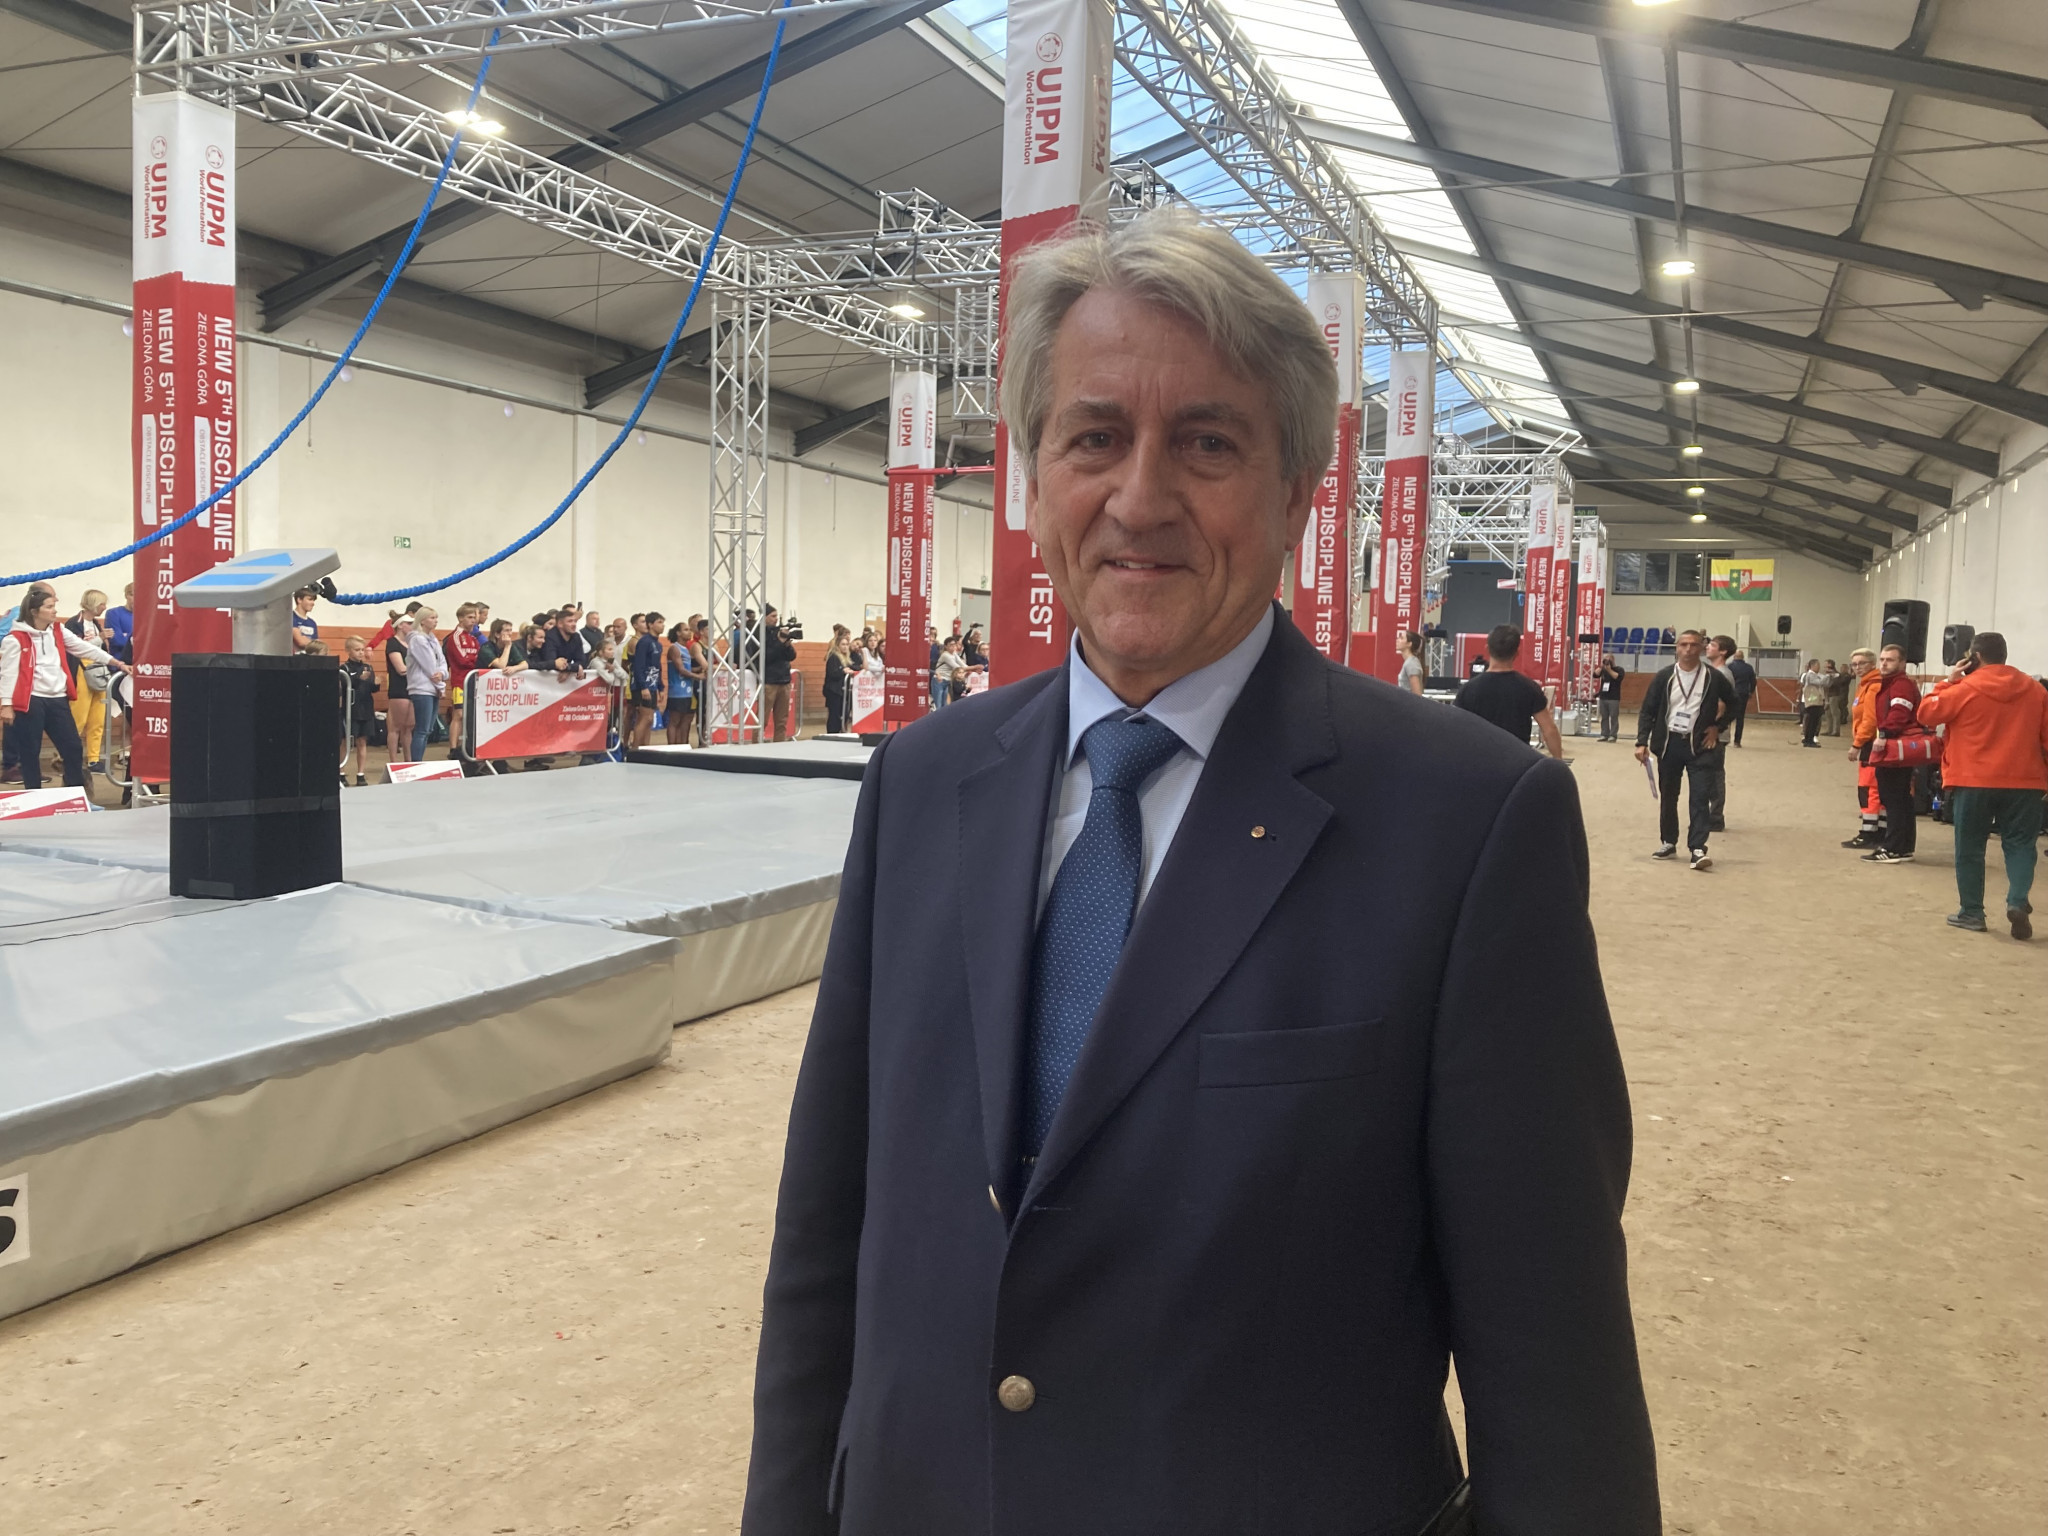 Long-serving UIPM President Klaus Schormann has faced accusations of a dictatorial style of leadership, but has argued obstacle would attract new athletes and audiences to the sport ©ITG